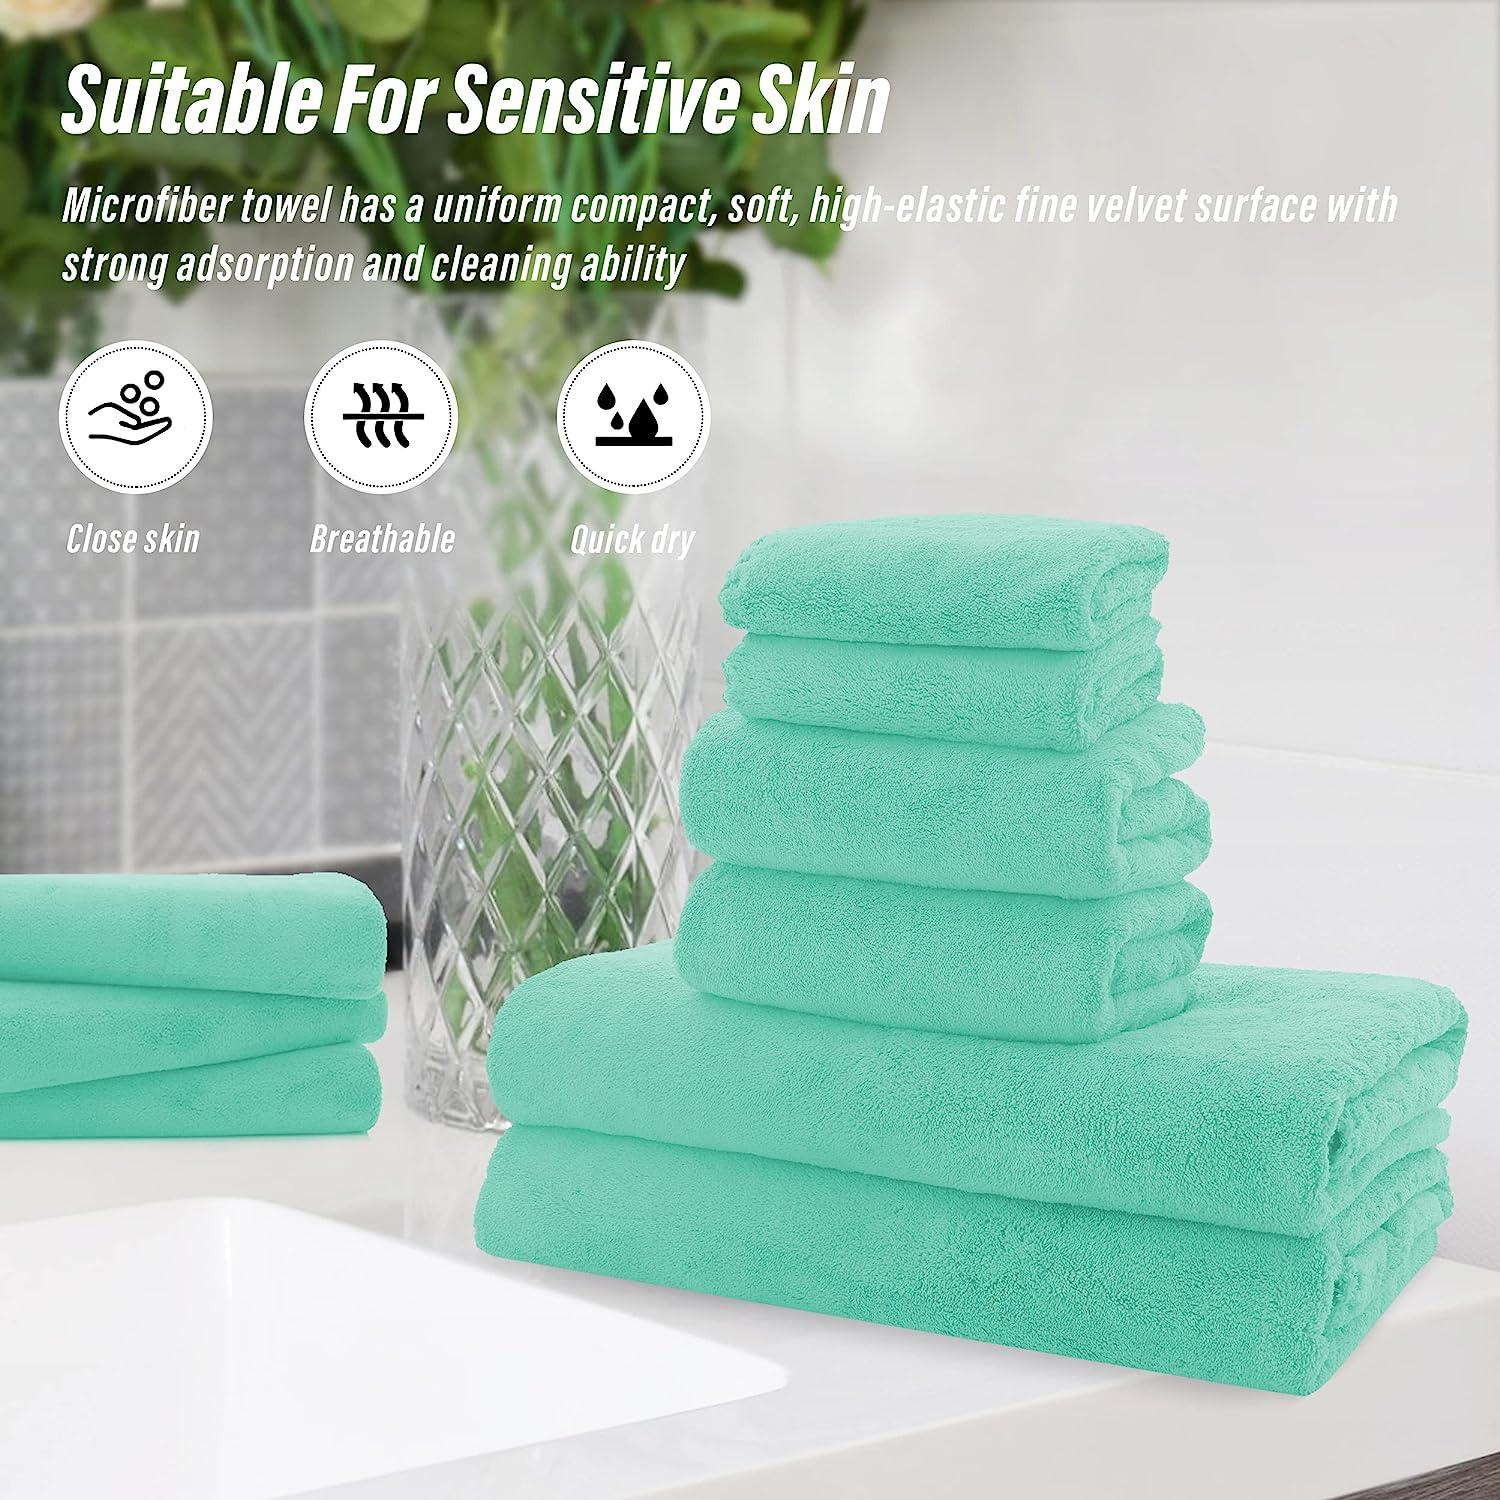 Tens Towels 8 Piece Towels Set, 2 Extra Large Bath Towels, 2 Hand Towels, 4 Washcloths, 100% Cotton, Lighter Weight, Quicker to Dry, Super Absorbent